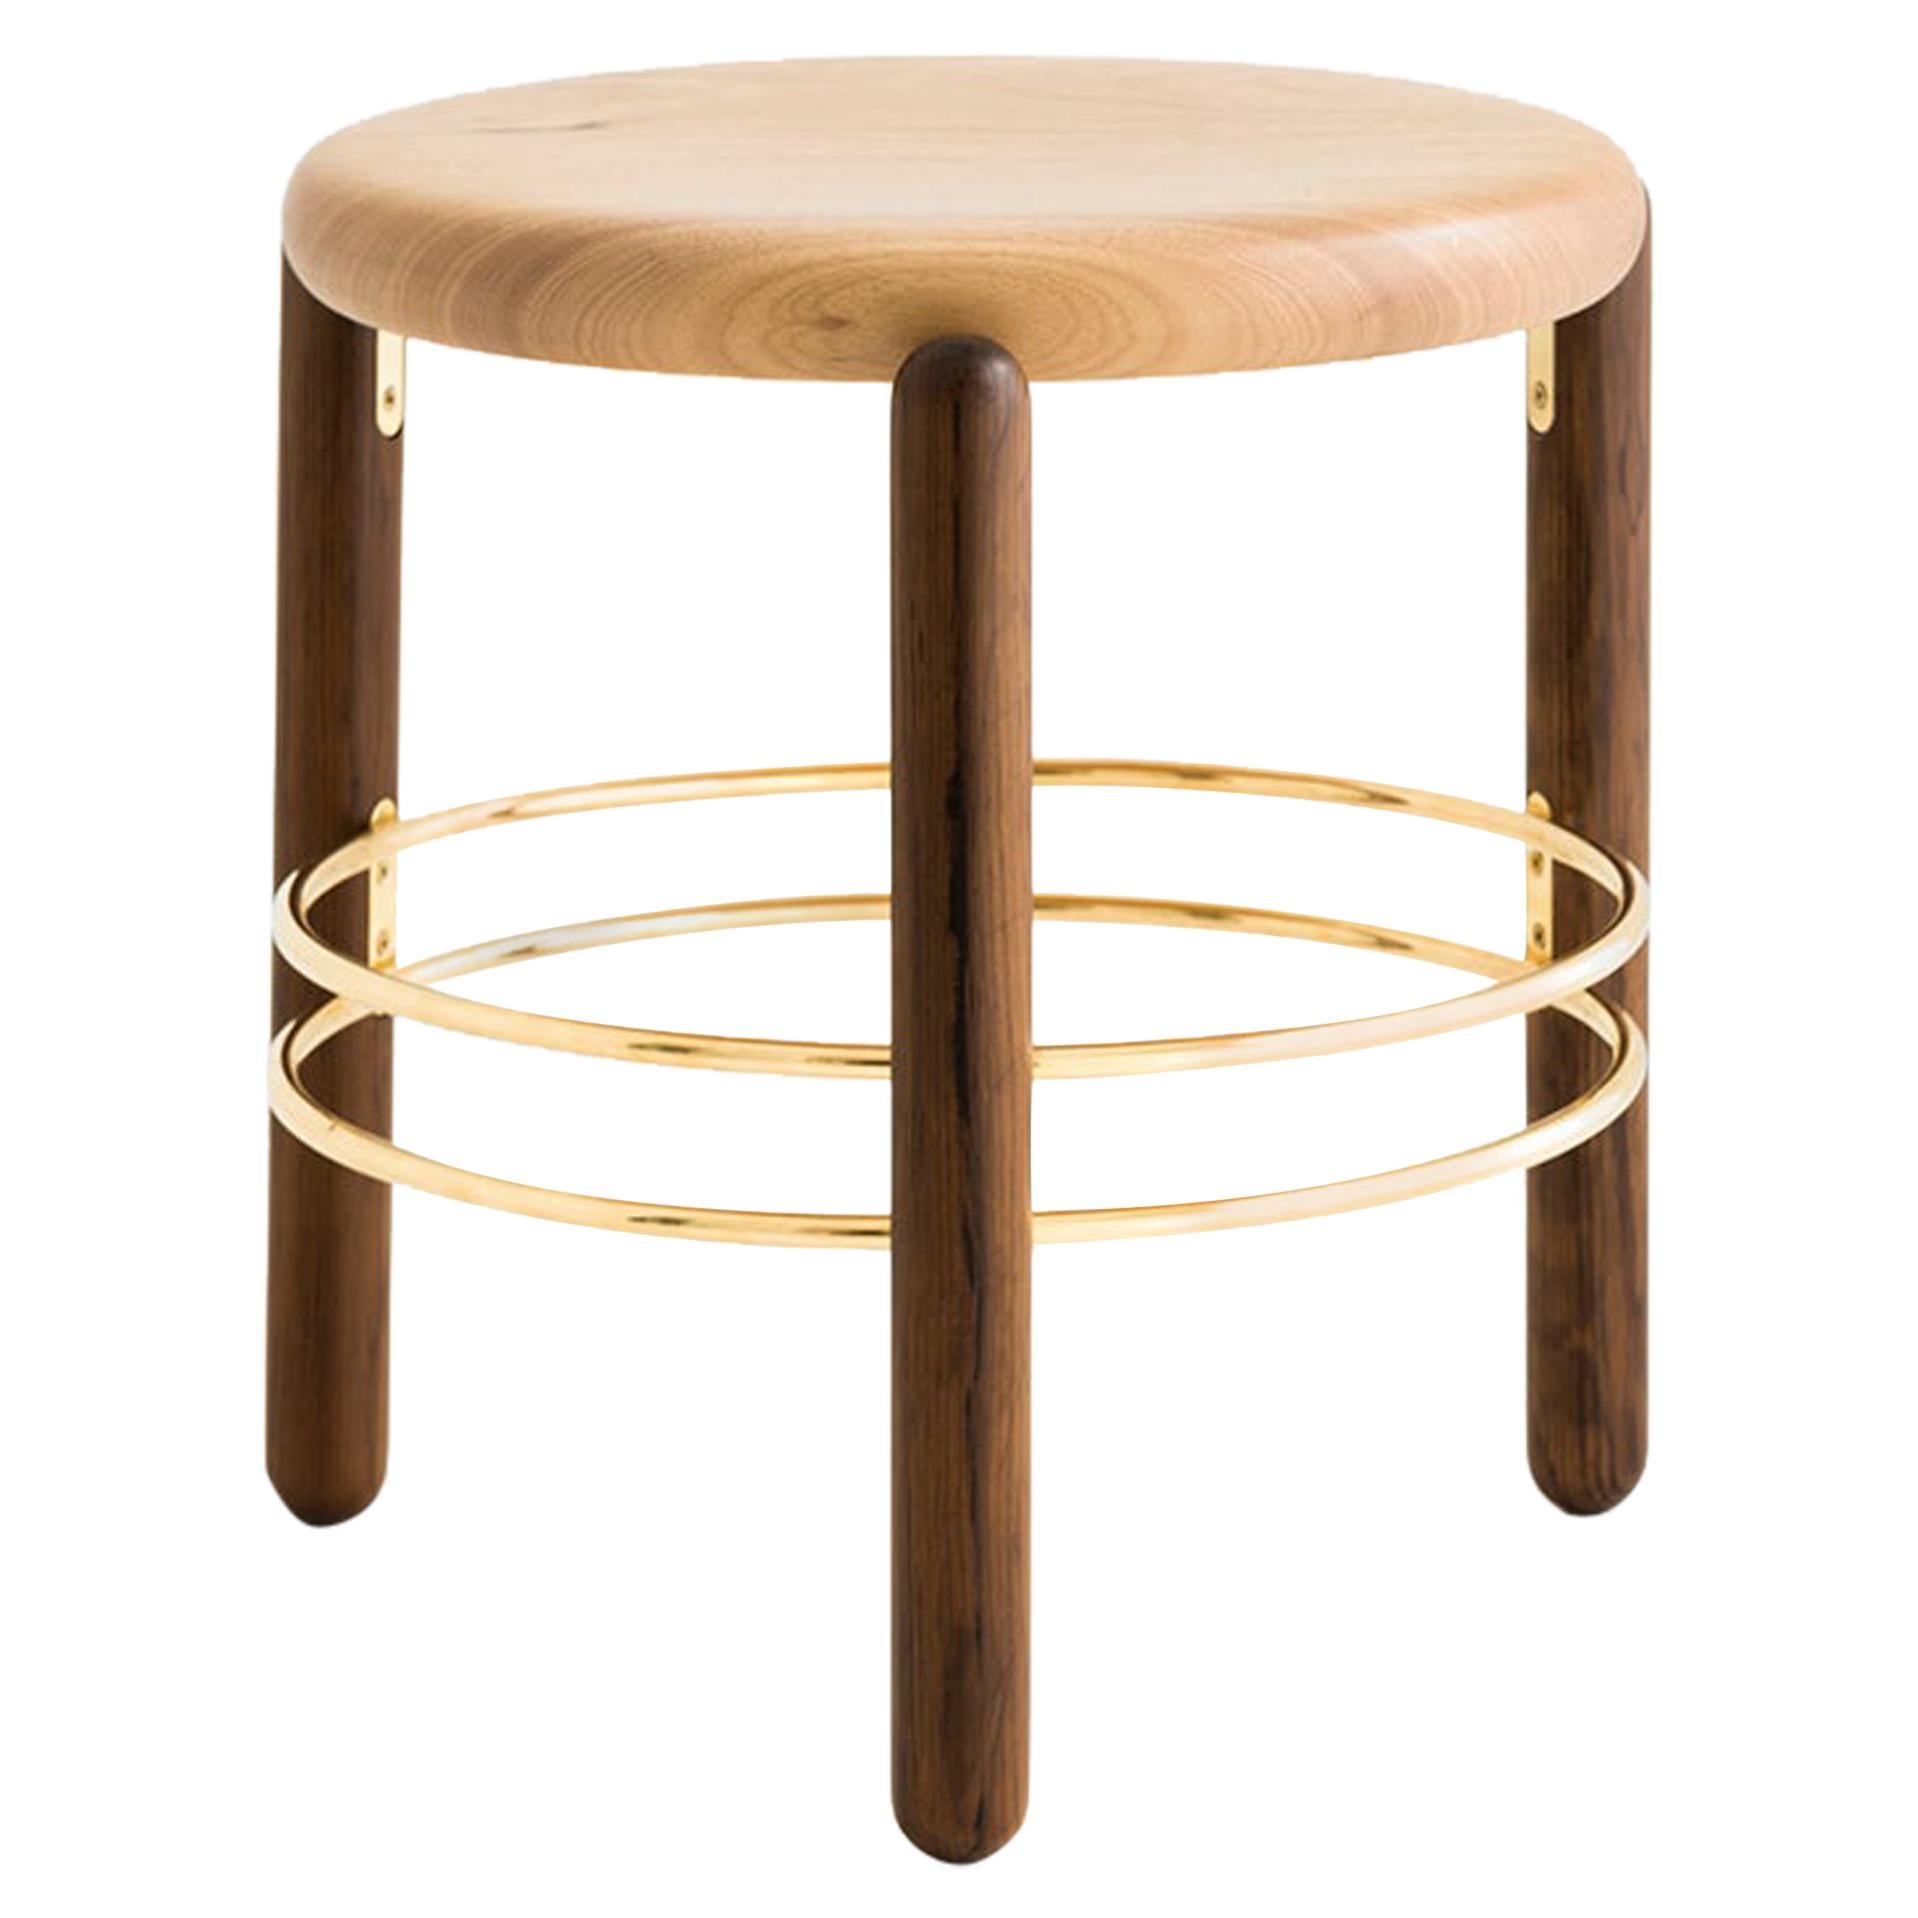 Brass and Wood Sculpted Stool, Leandro Garcia, Contemporary Brazil Design